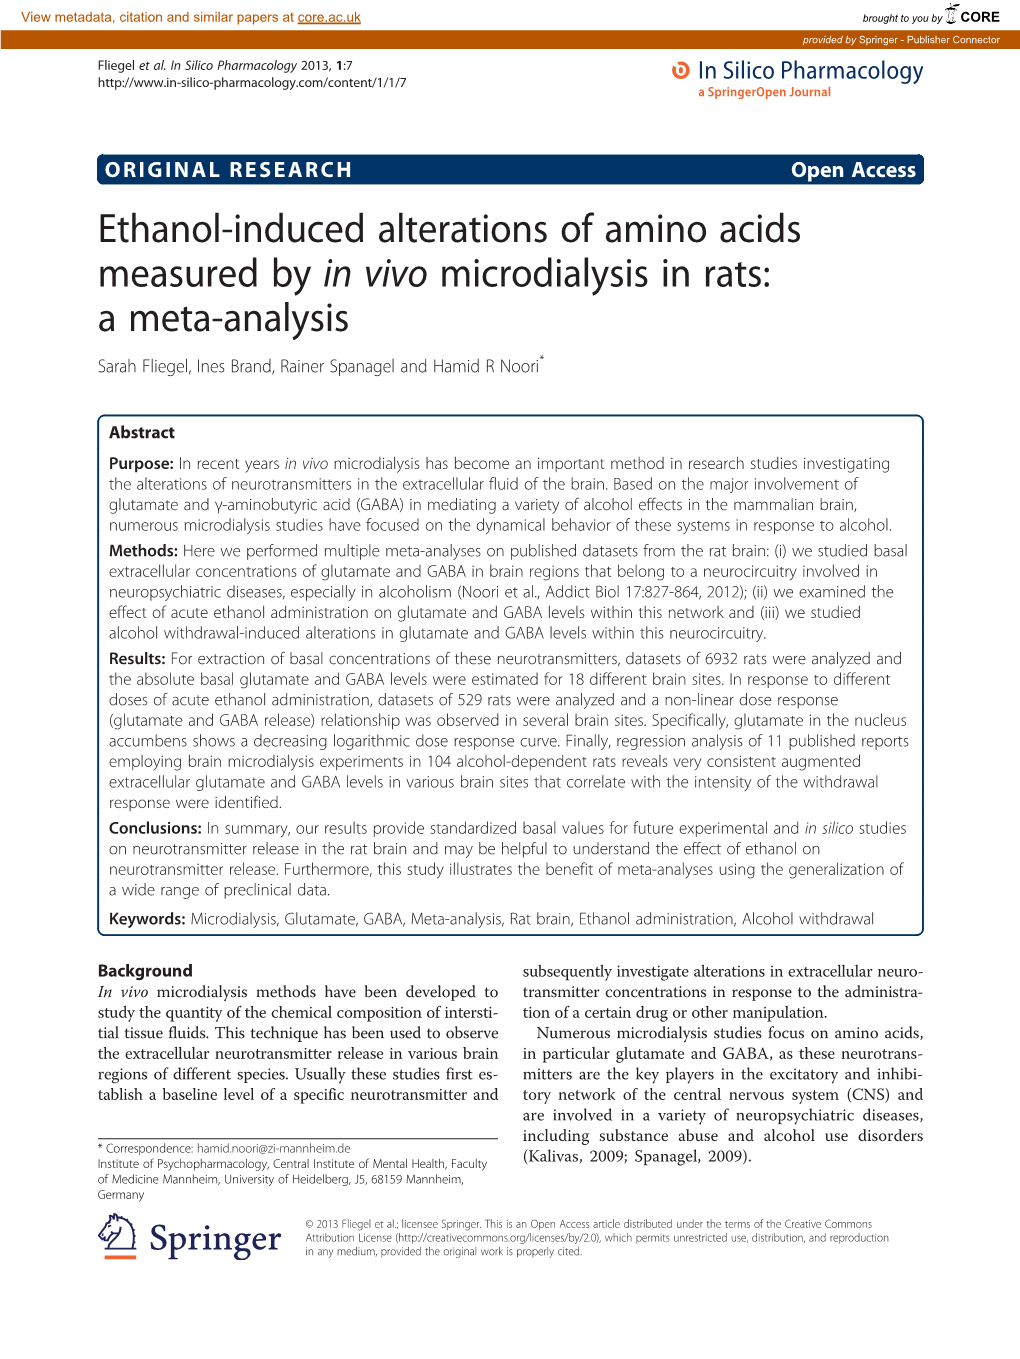 Ethanol-Induced Alterations of Amino Acids Measured by in Vivo Microdialysis in Rats: a Meta-Analysis Sarah Fliegel, Ines Brand, Rainer Spanagel and Hamid R Noori*